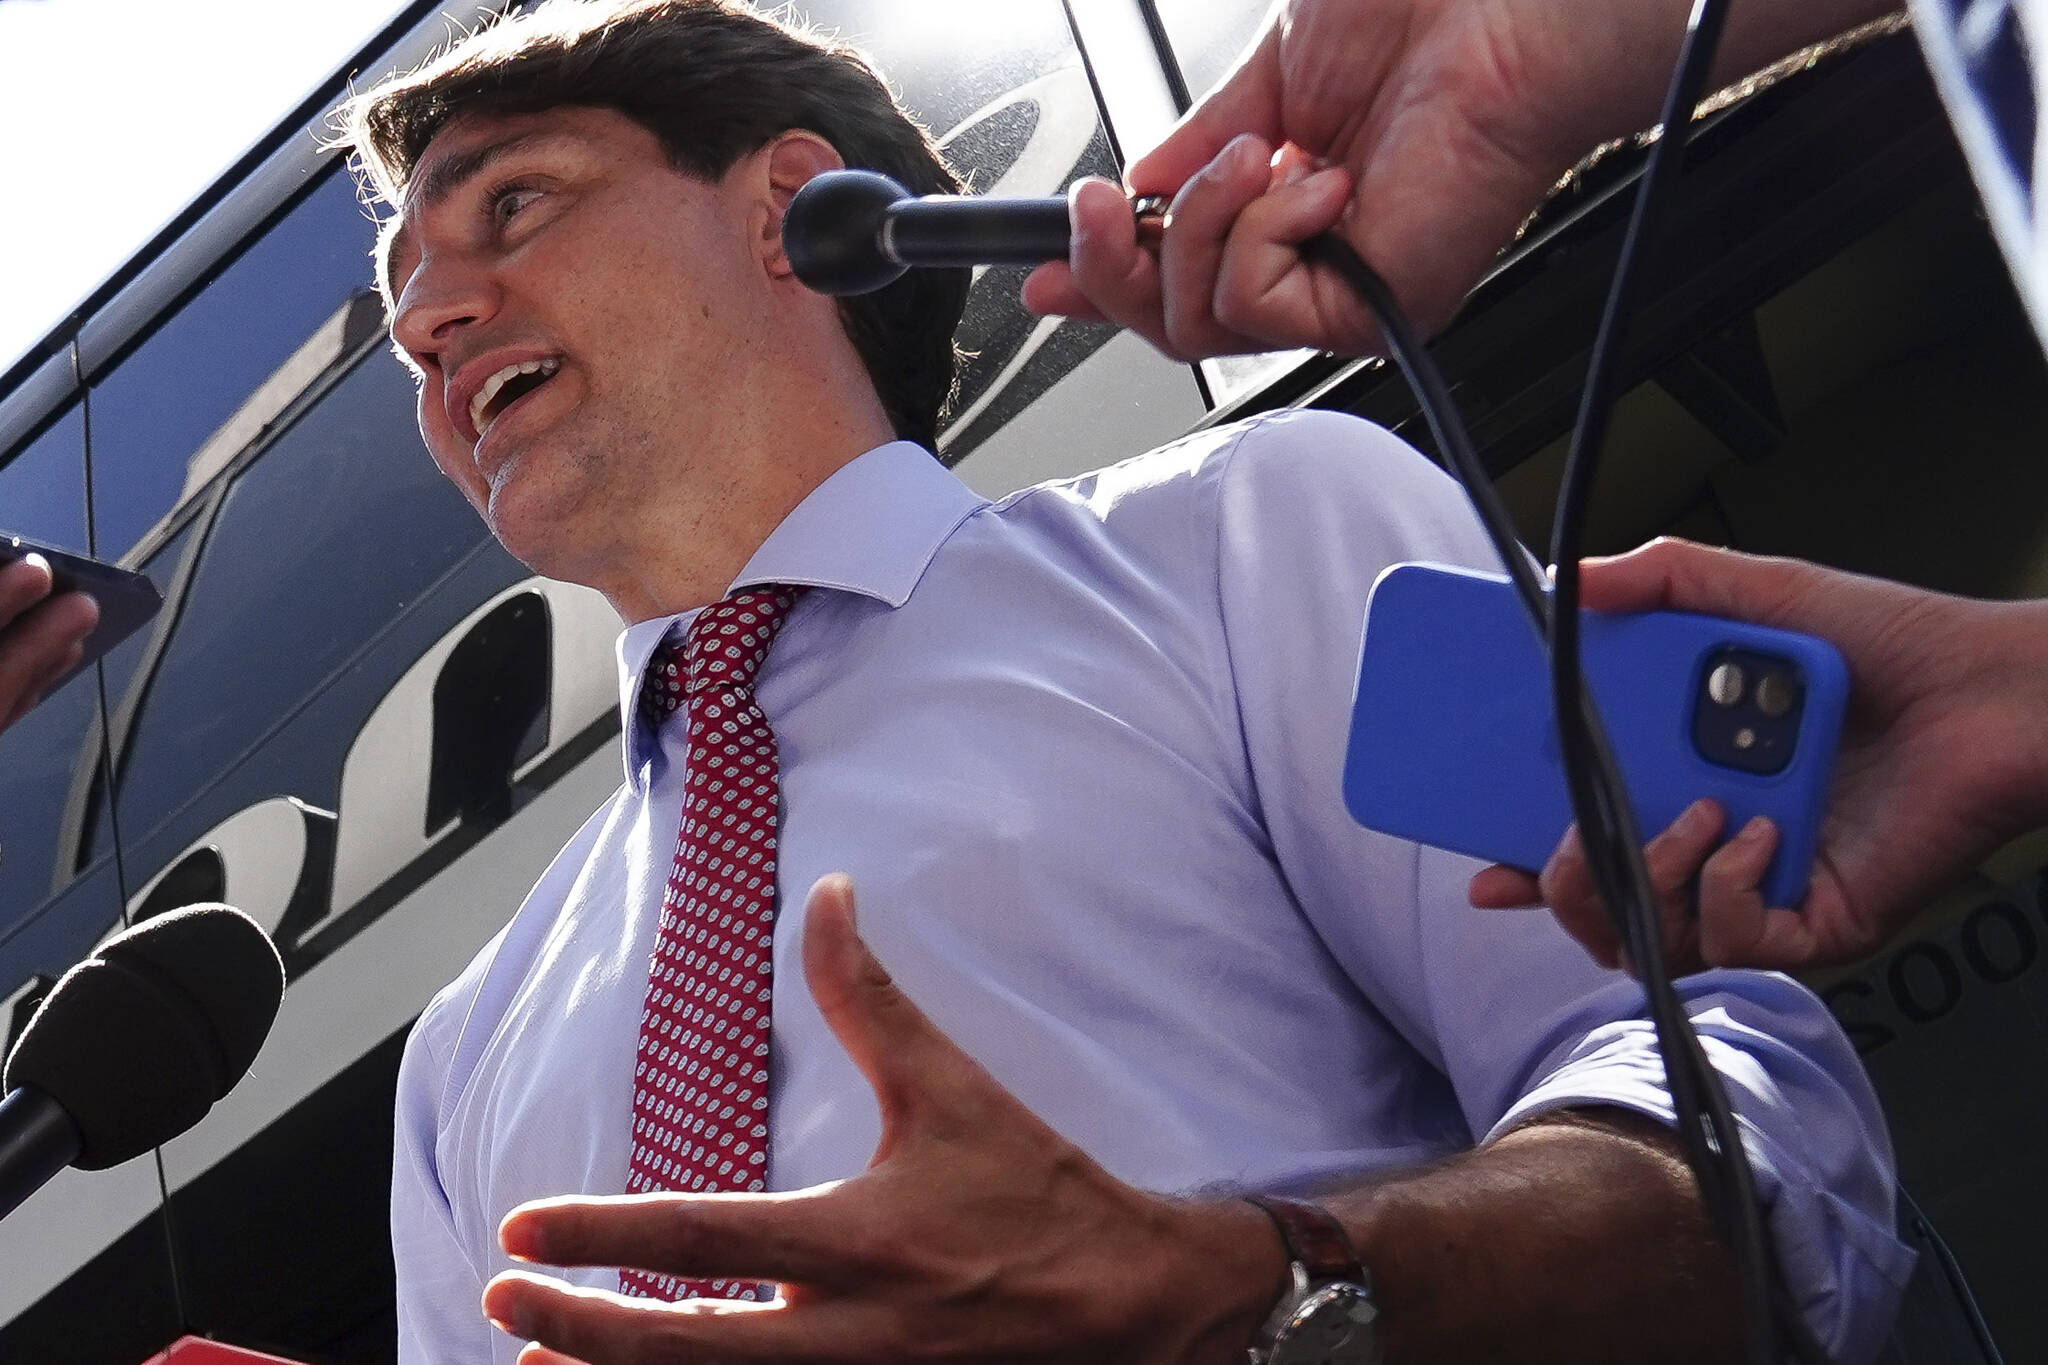 Prime Minister Justin Trudeau talks with reporters on Tuesday, Aug 24, 2021. THE CANADIAN PRESS/Sean Kilpatrick